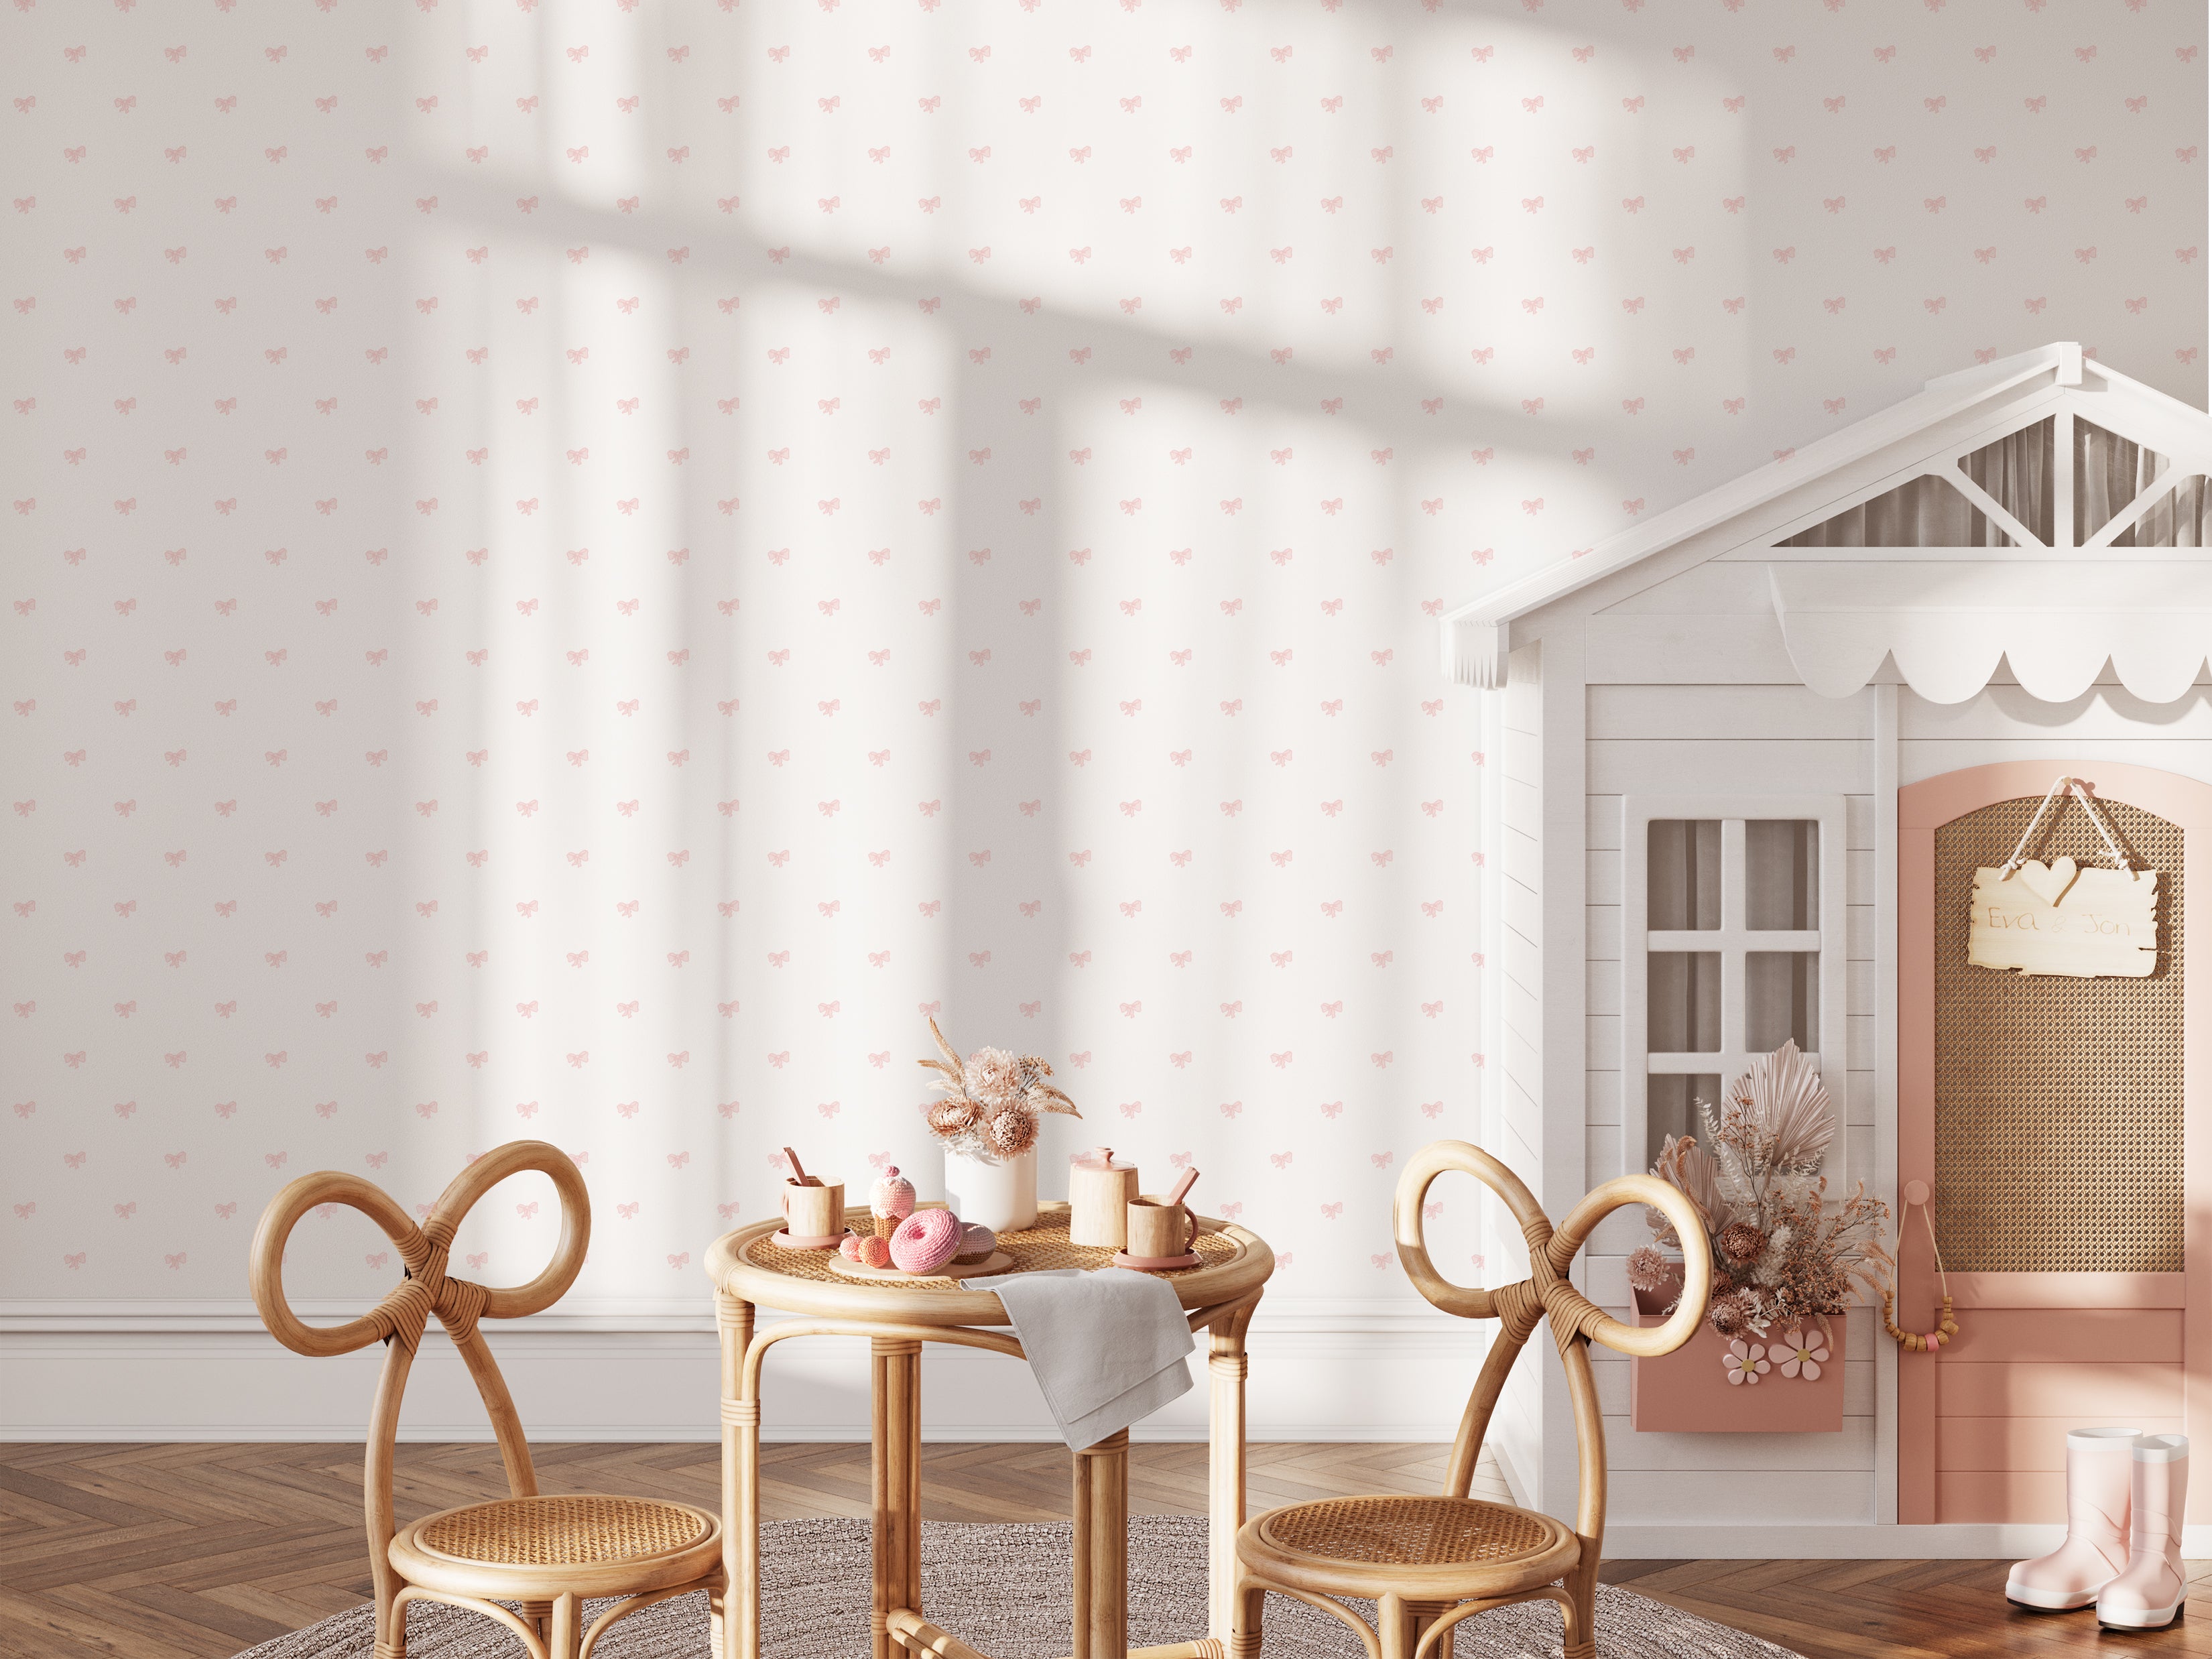 A charming child's playroom featuring the Tiny Bows Wallpaper, adorned with small pink bows on a light cream background. The room includes a playful house-shaped bookcase, a rattan children's table set, and a decorative floor rug.